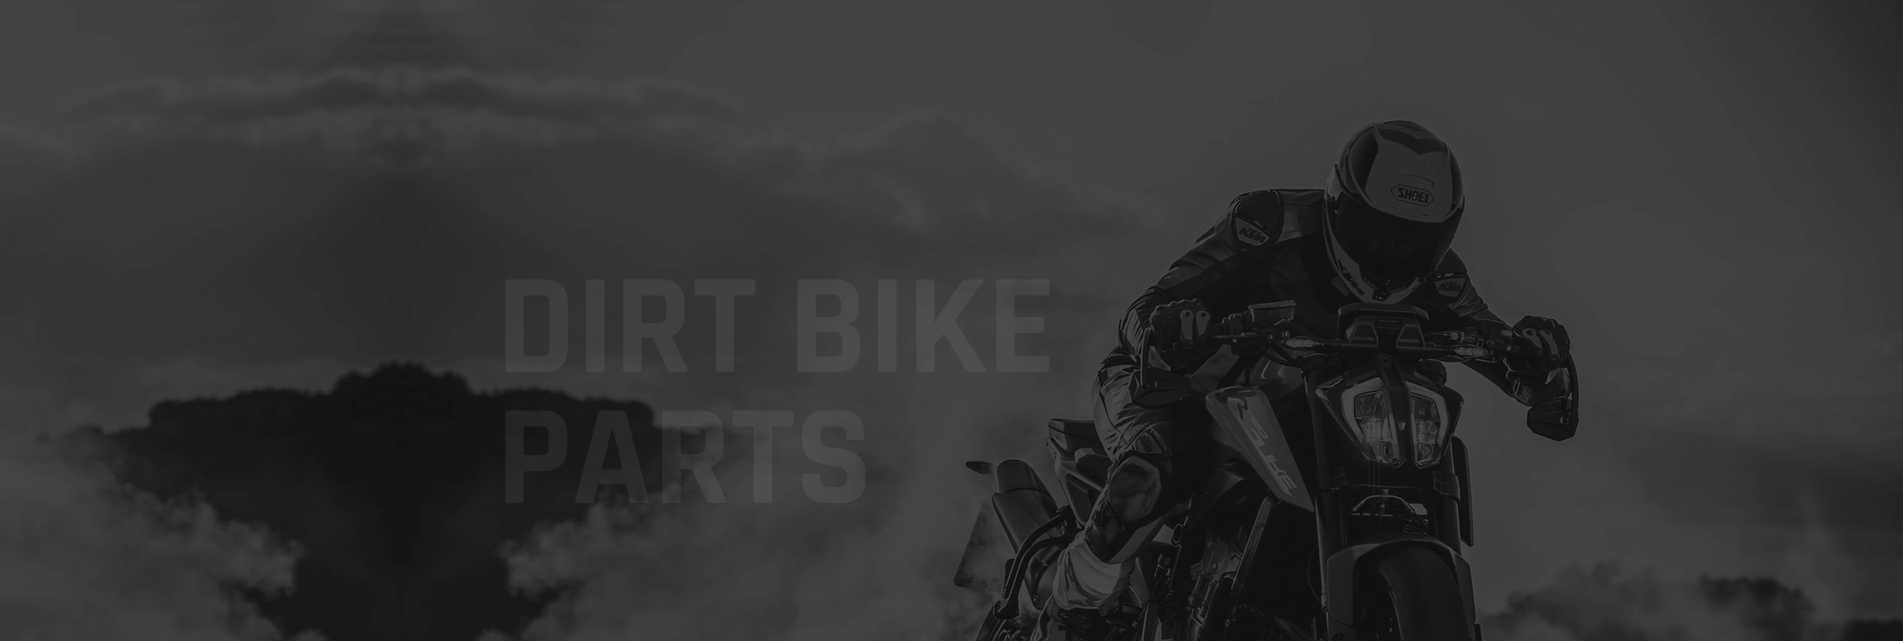 Sell Your Bike banner